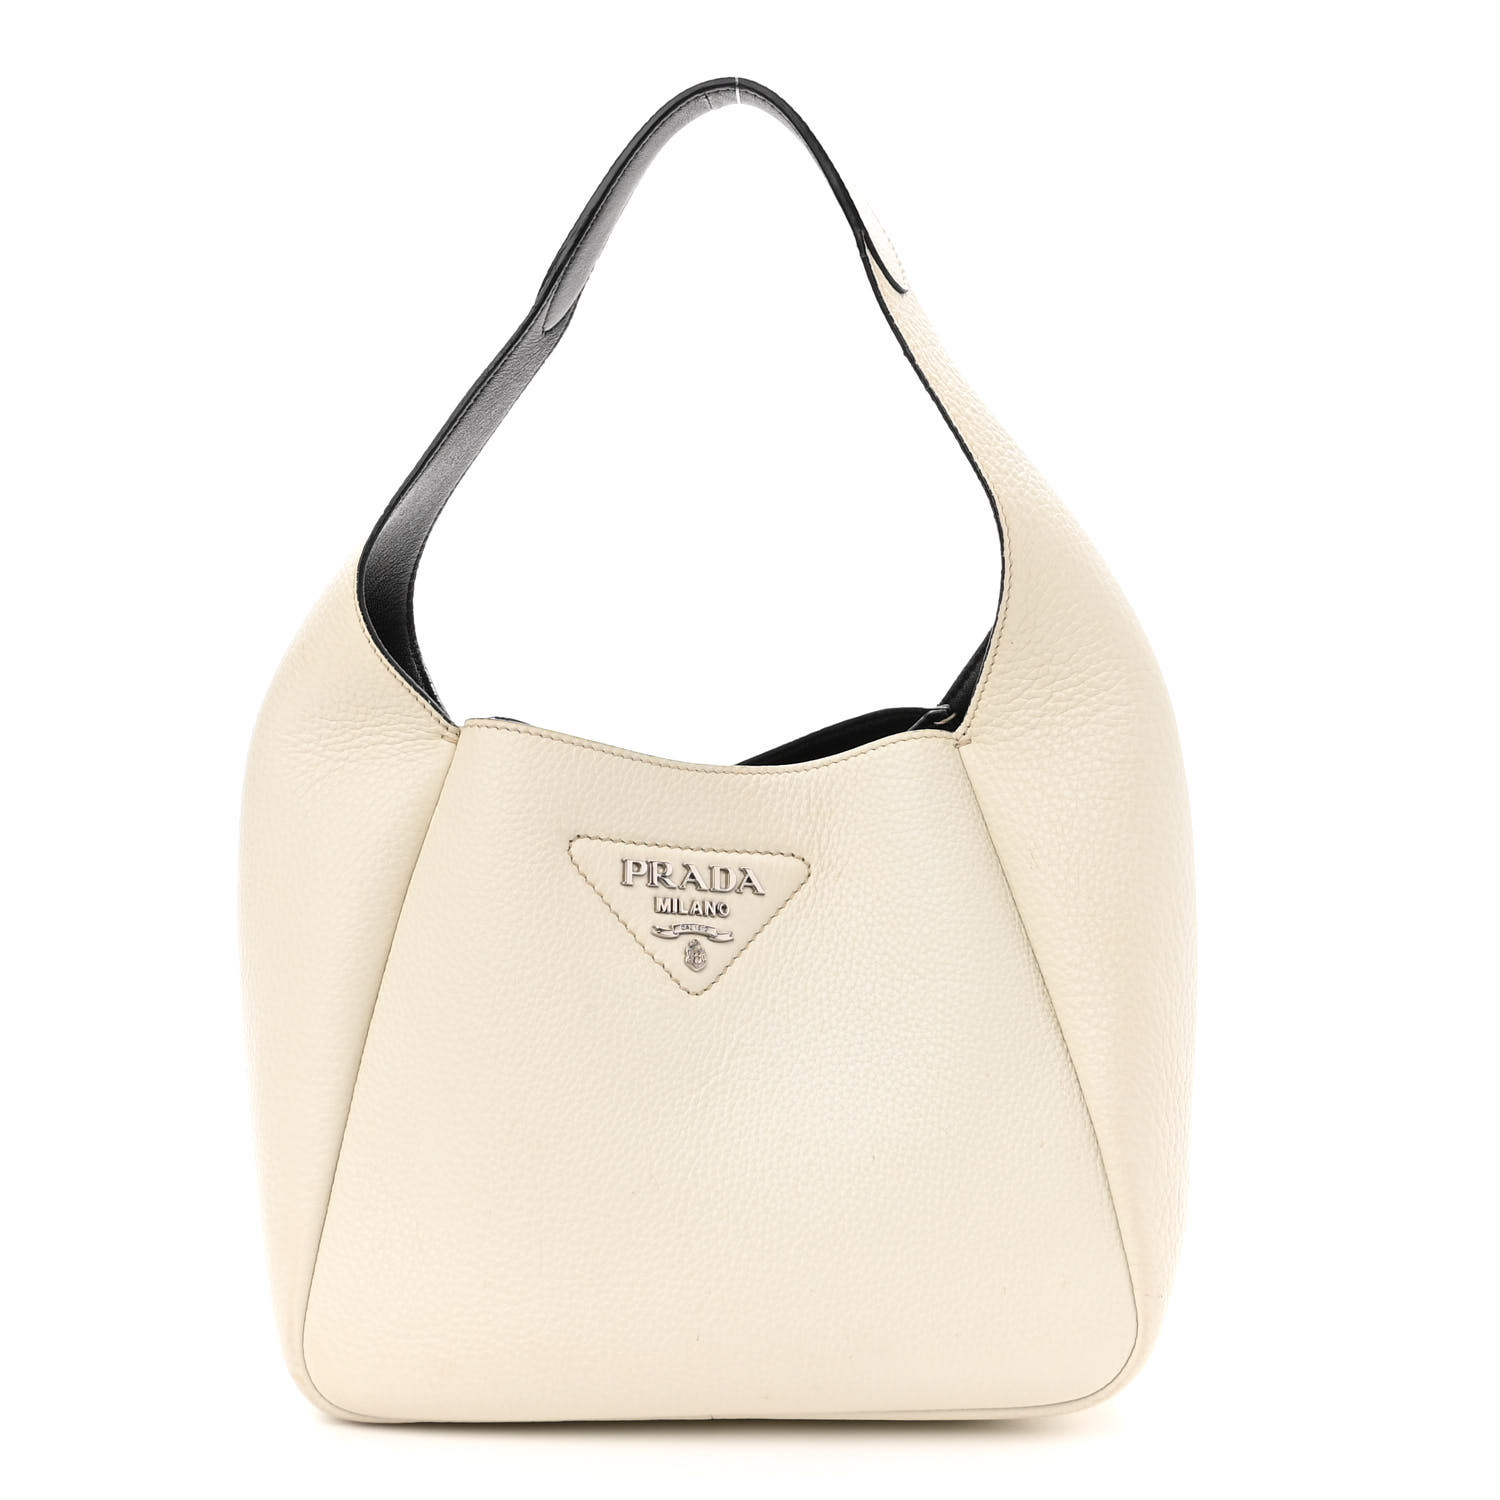 front view image of a PRADA Vitello Daino Dynamique Hobo in the colors Talco and Black by FASHIONPHILE